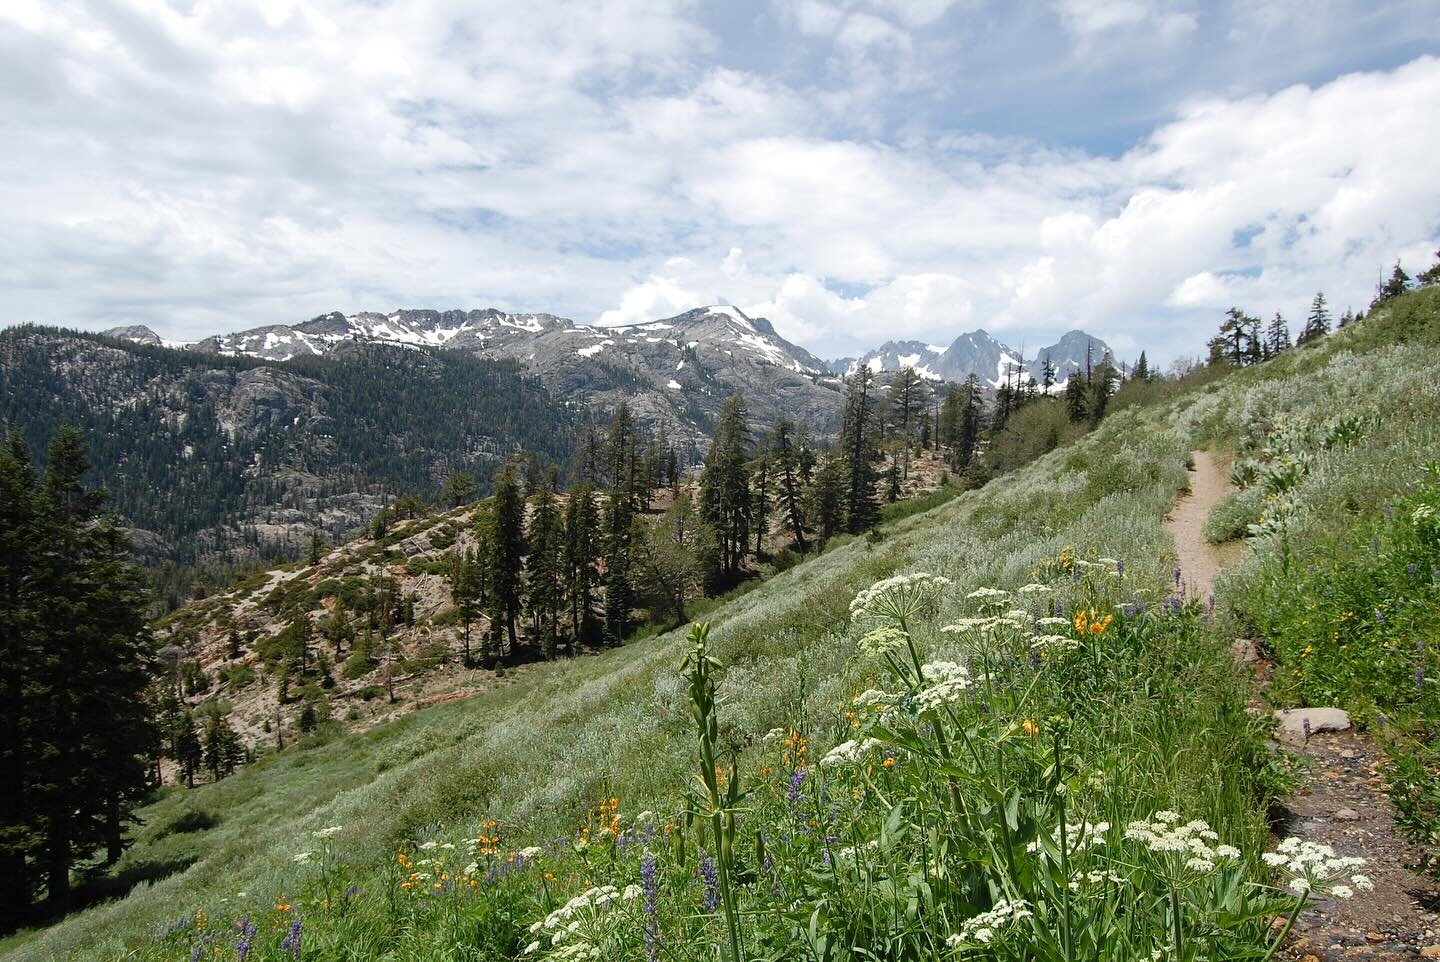 Roses are red. violets are blue. We love STEM outdoors, and hope you do too! This Valentines&rsquo; Day, we&rsquo;re thinking about the places we love at Sierra STEM. Swipe to see the places we love, here in our backyard here at Sierra STEM!
.
.
📍An